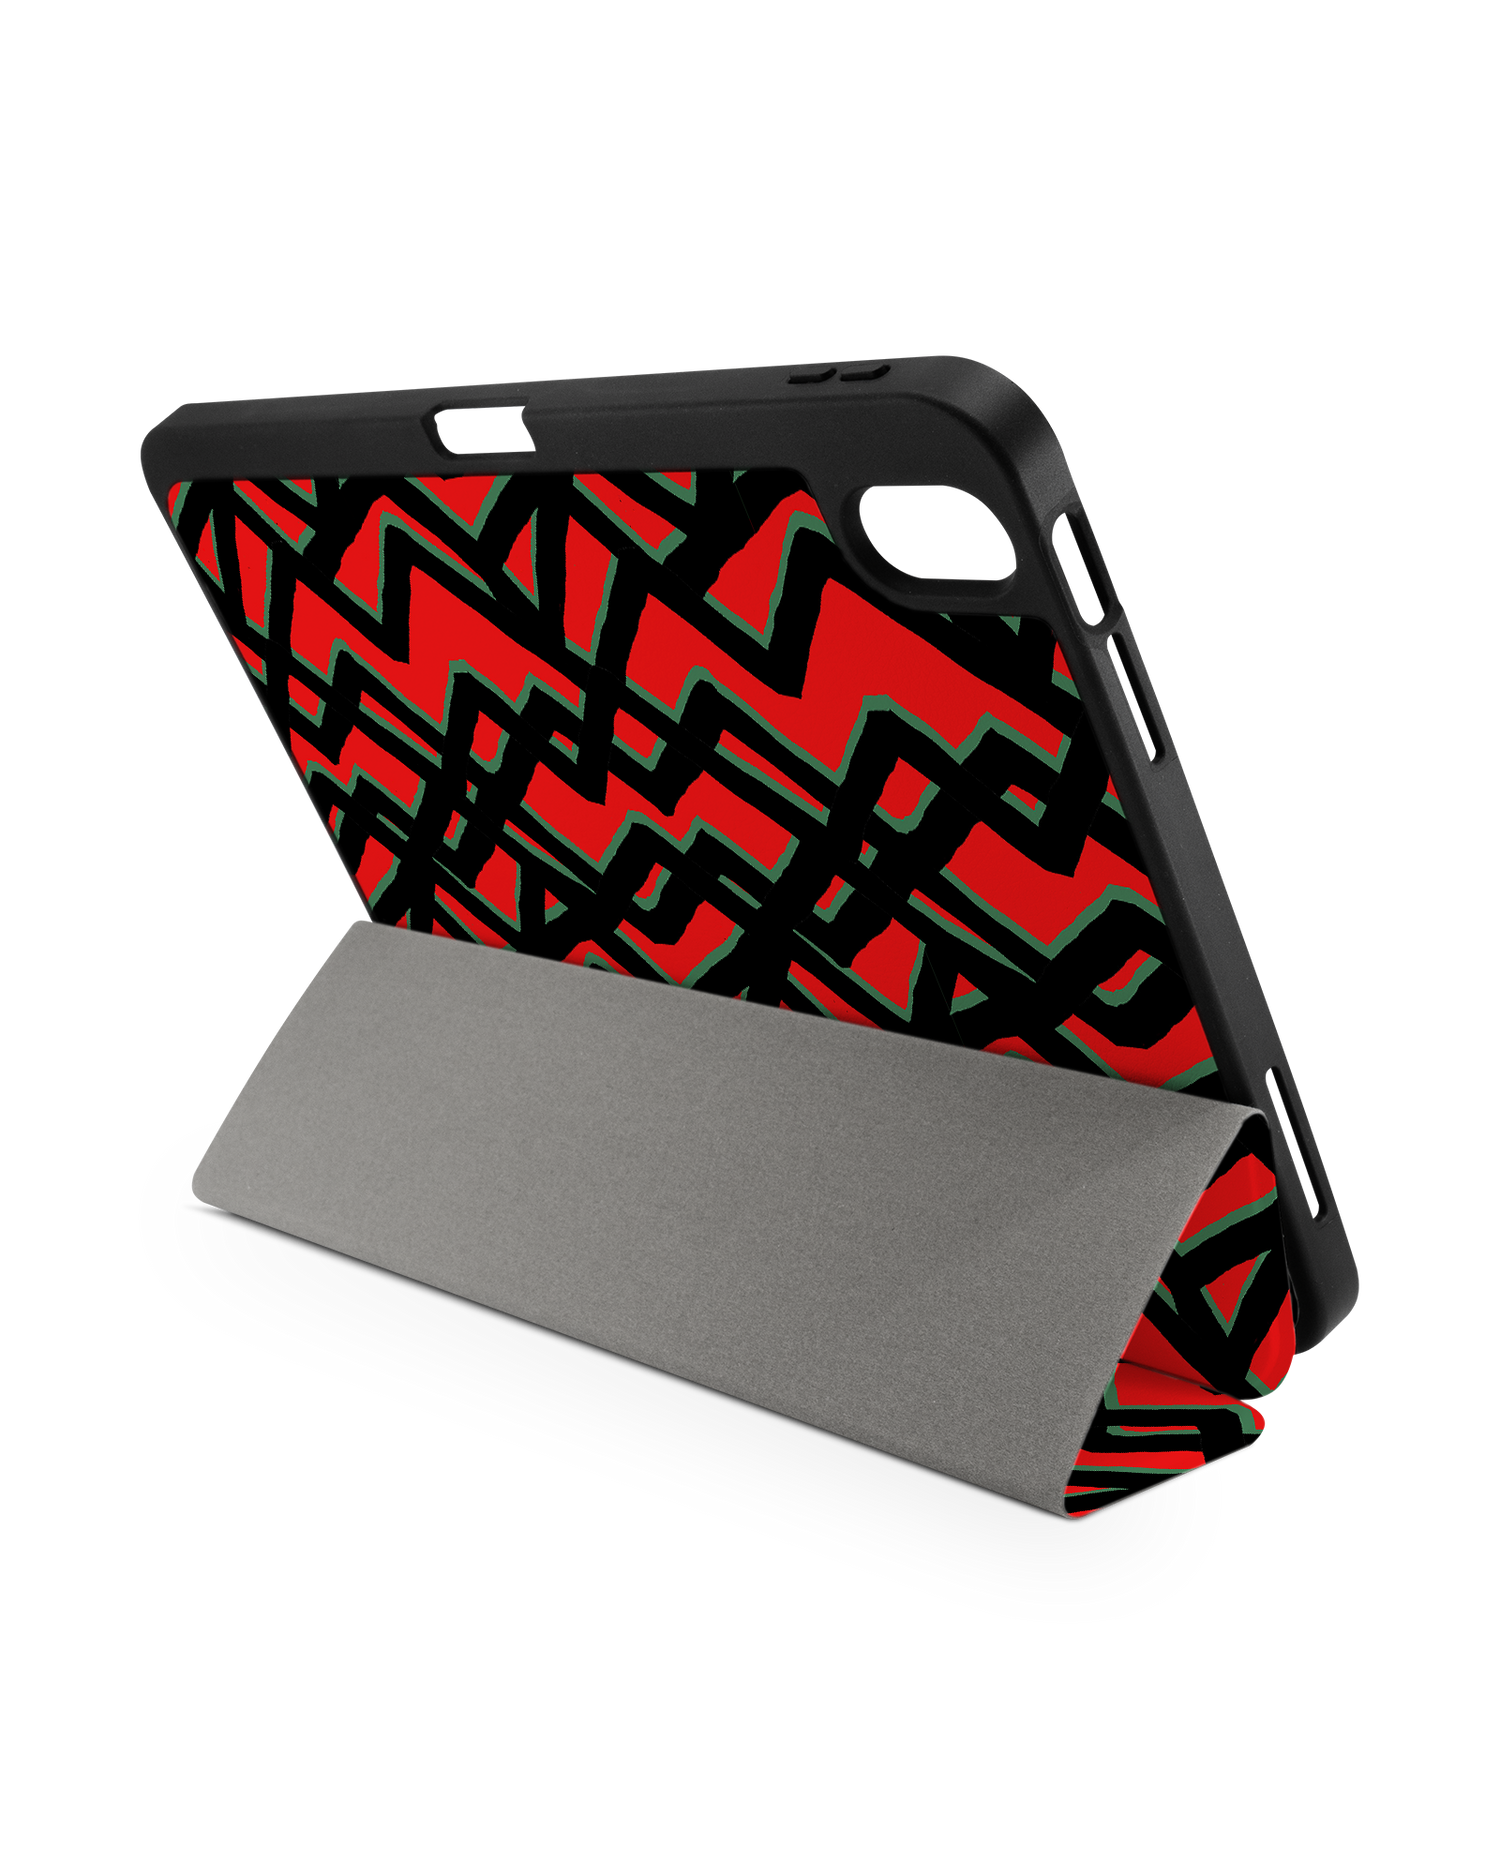 Fences Pattern iPad Case with Pencil Holder for Apple iPad (10th Generation): Set up in landscape format (back view)